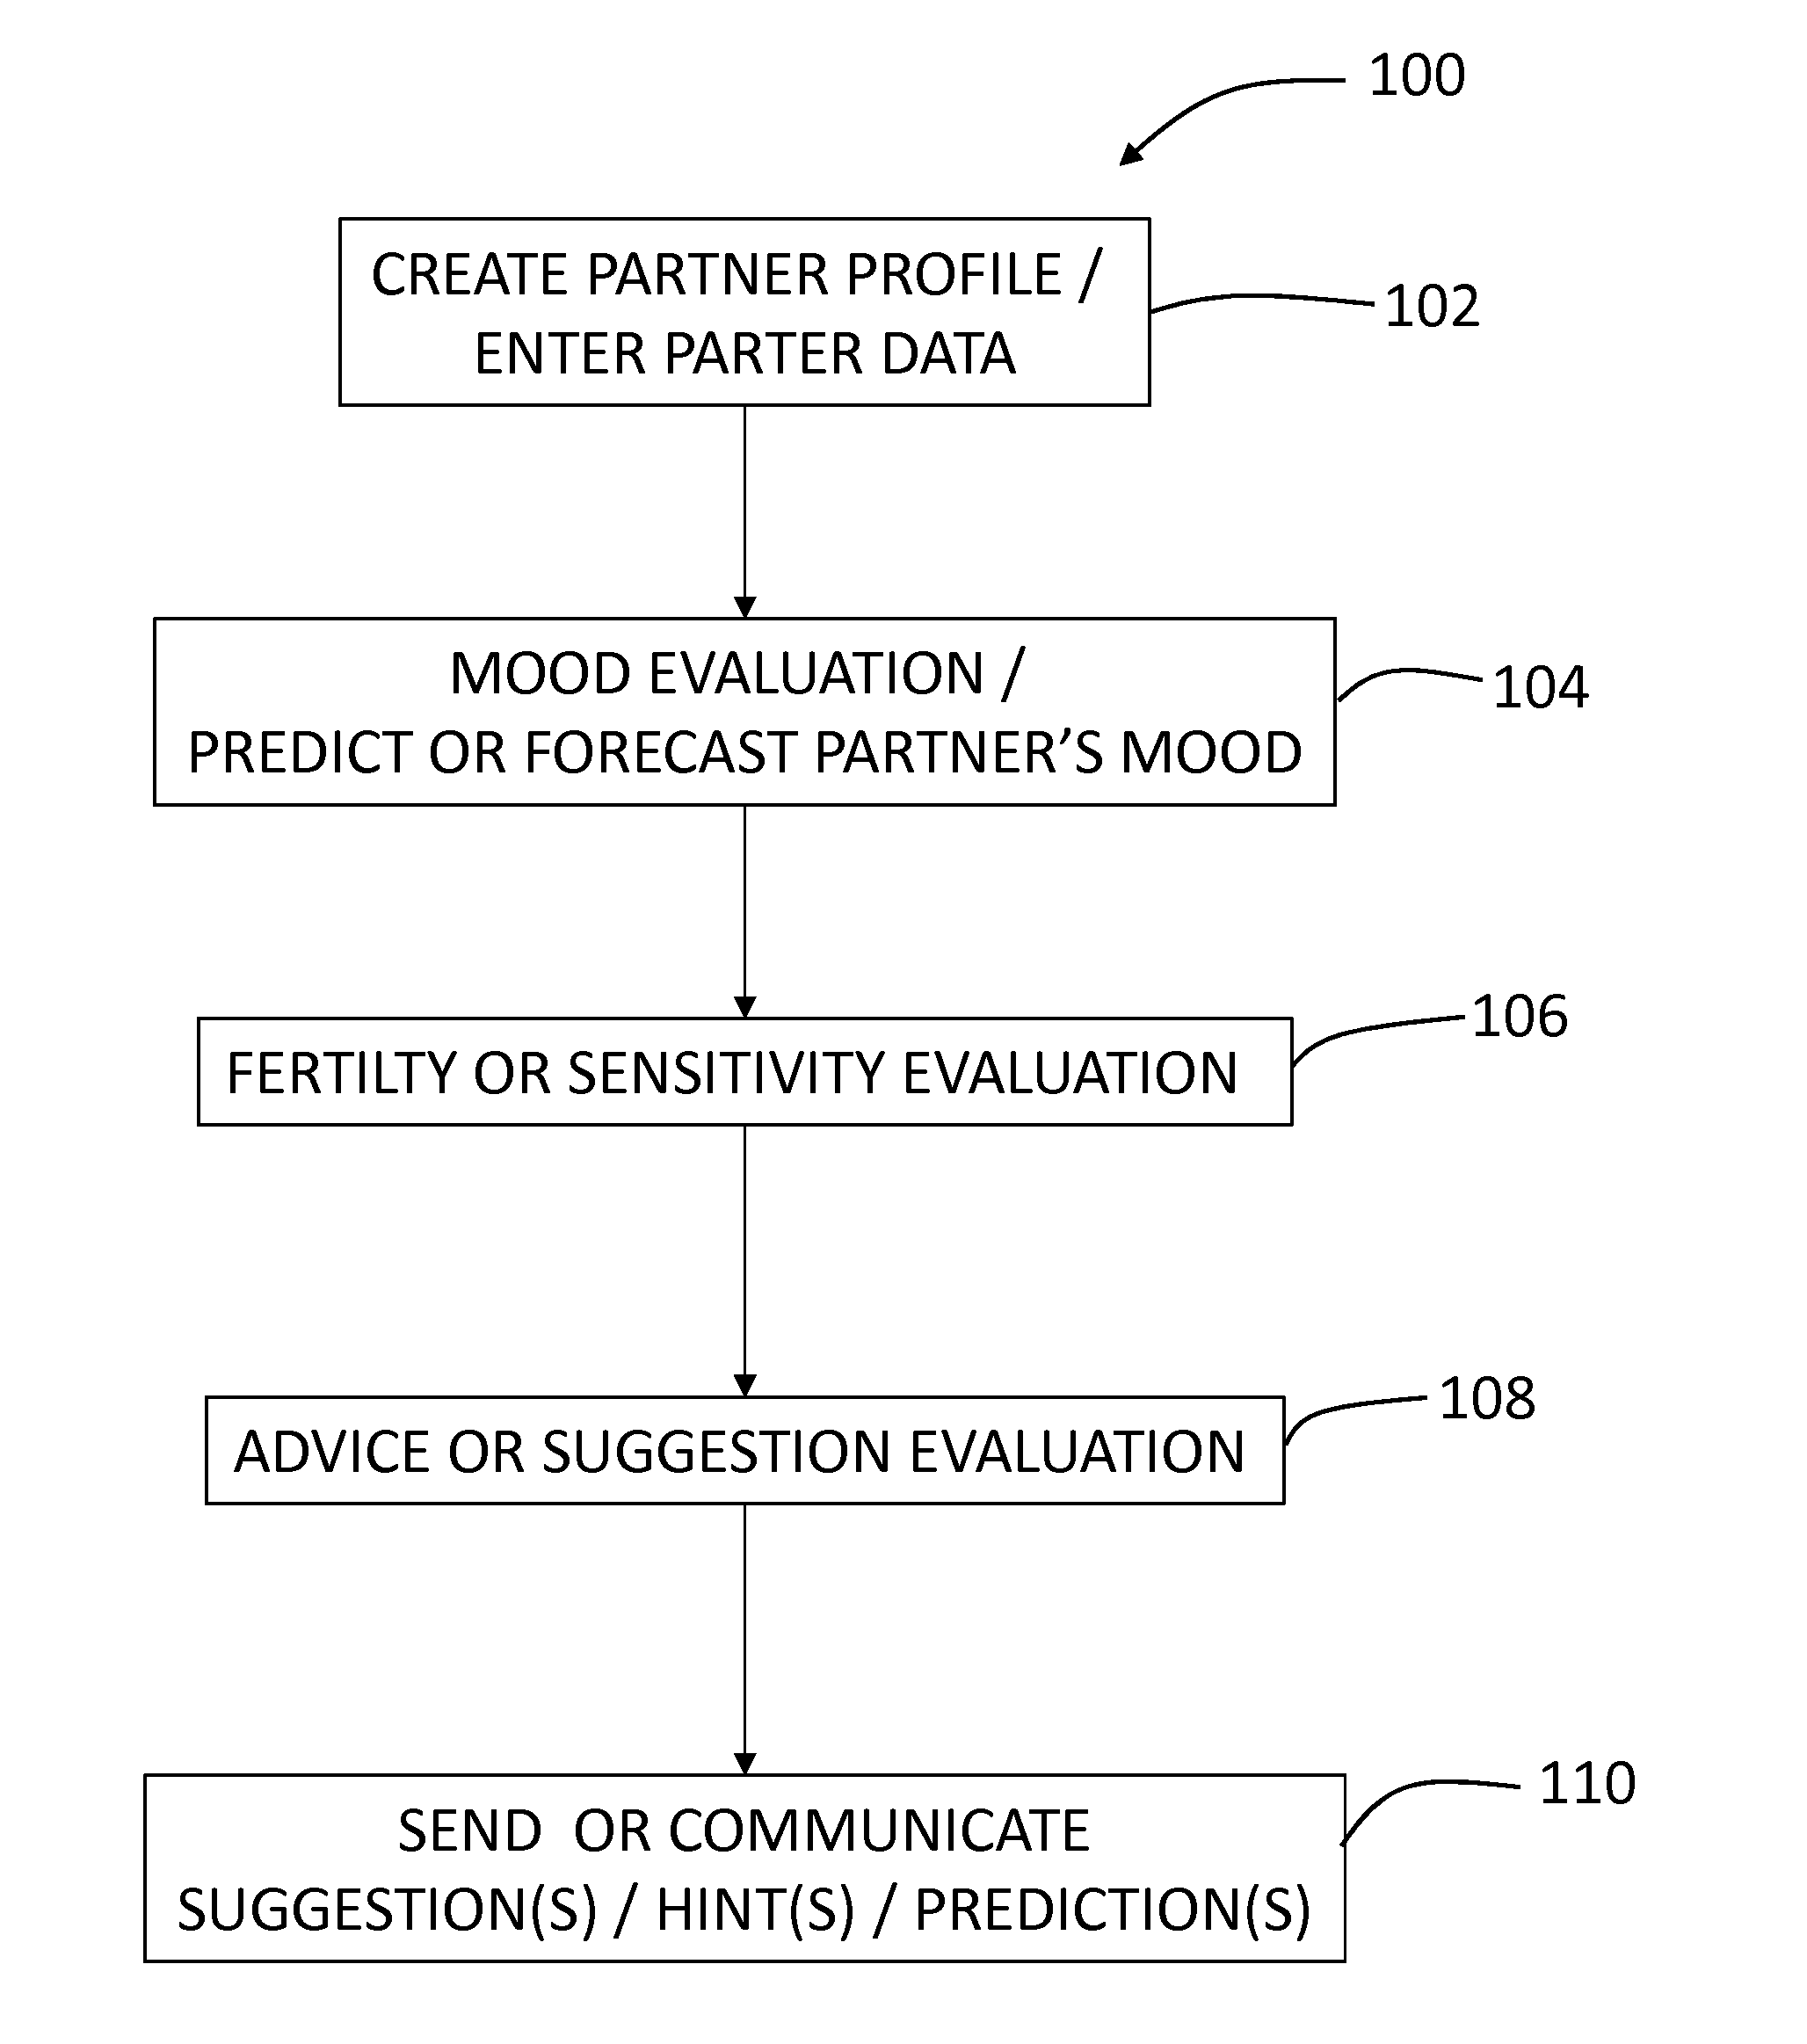 System and Method for Predicting and Communicating Data Relating to a Partner's Mood and Sensitivity